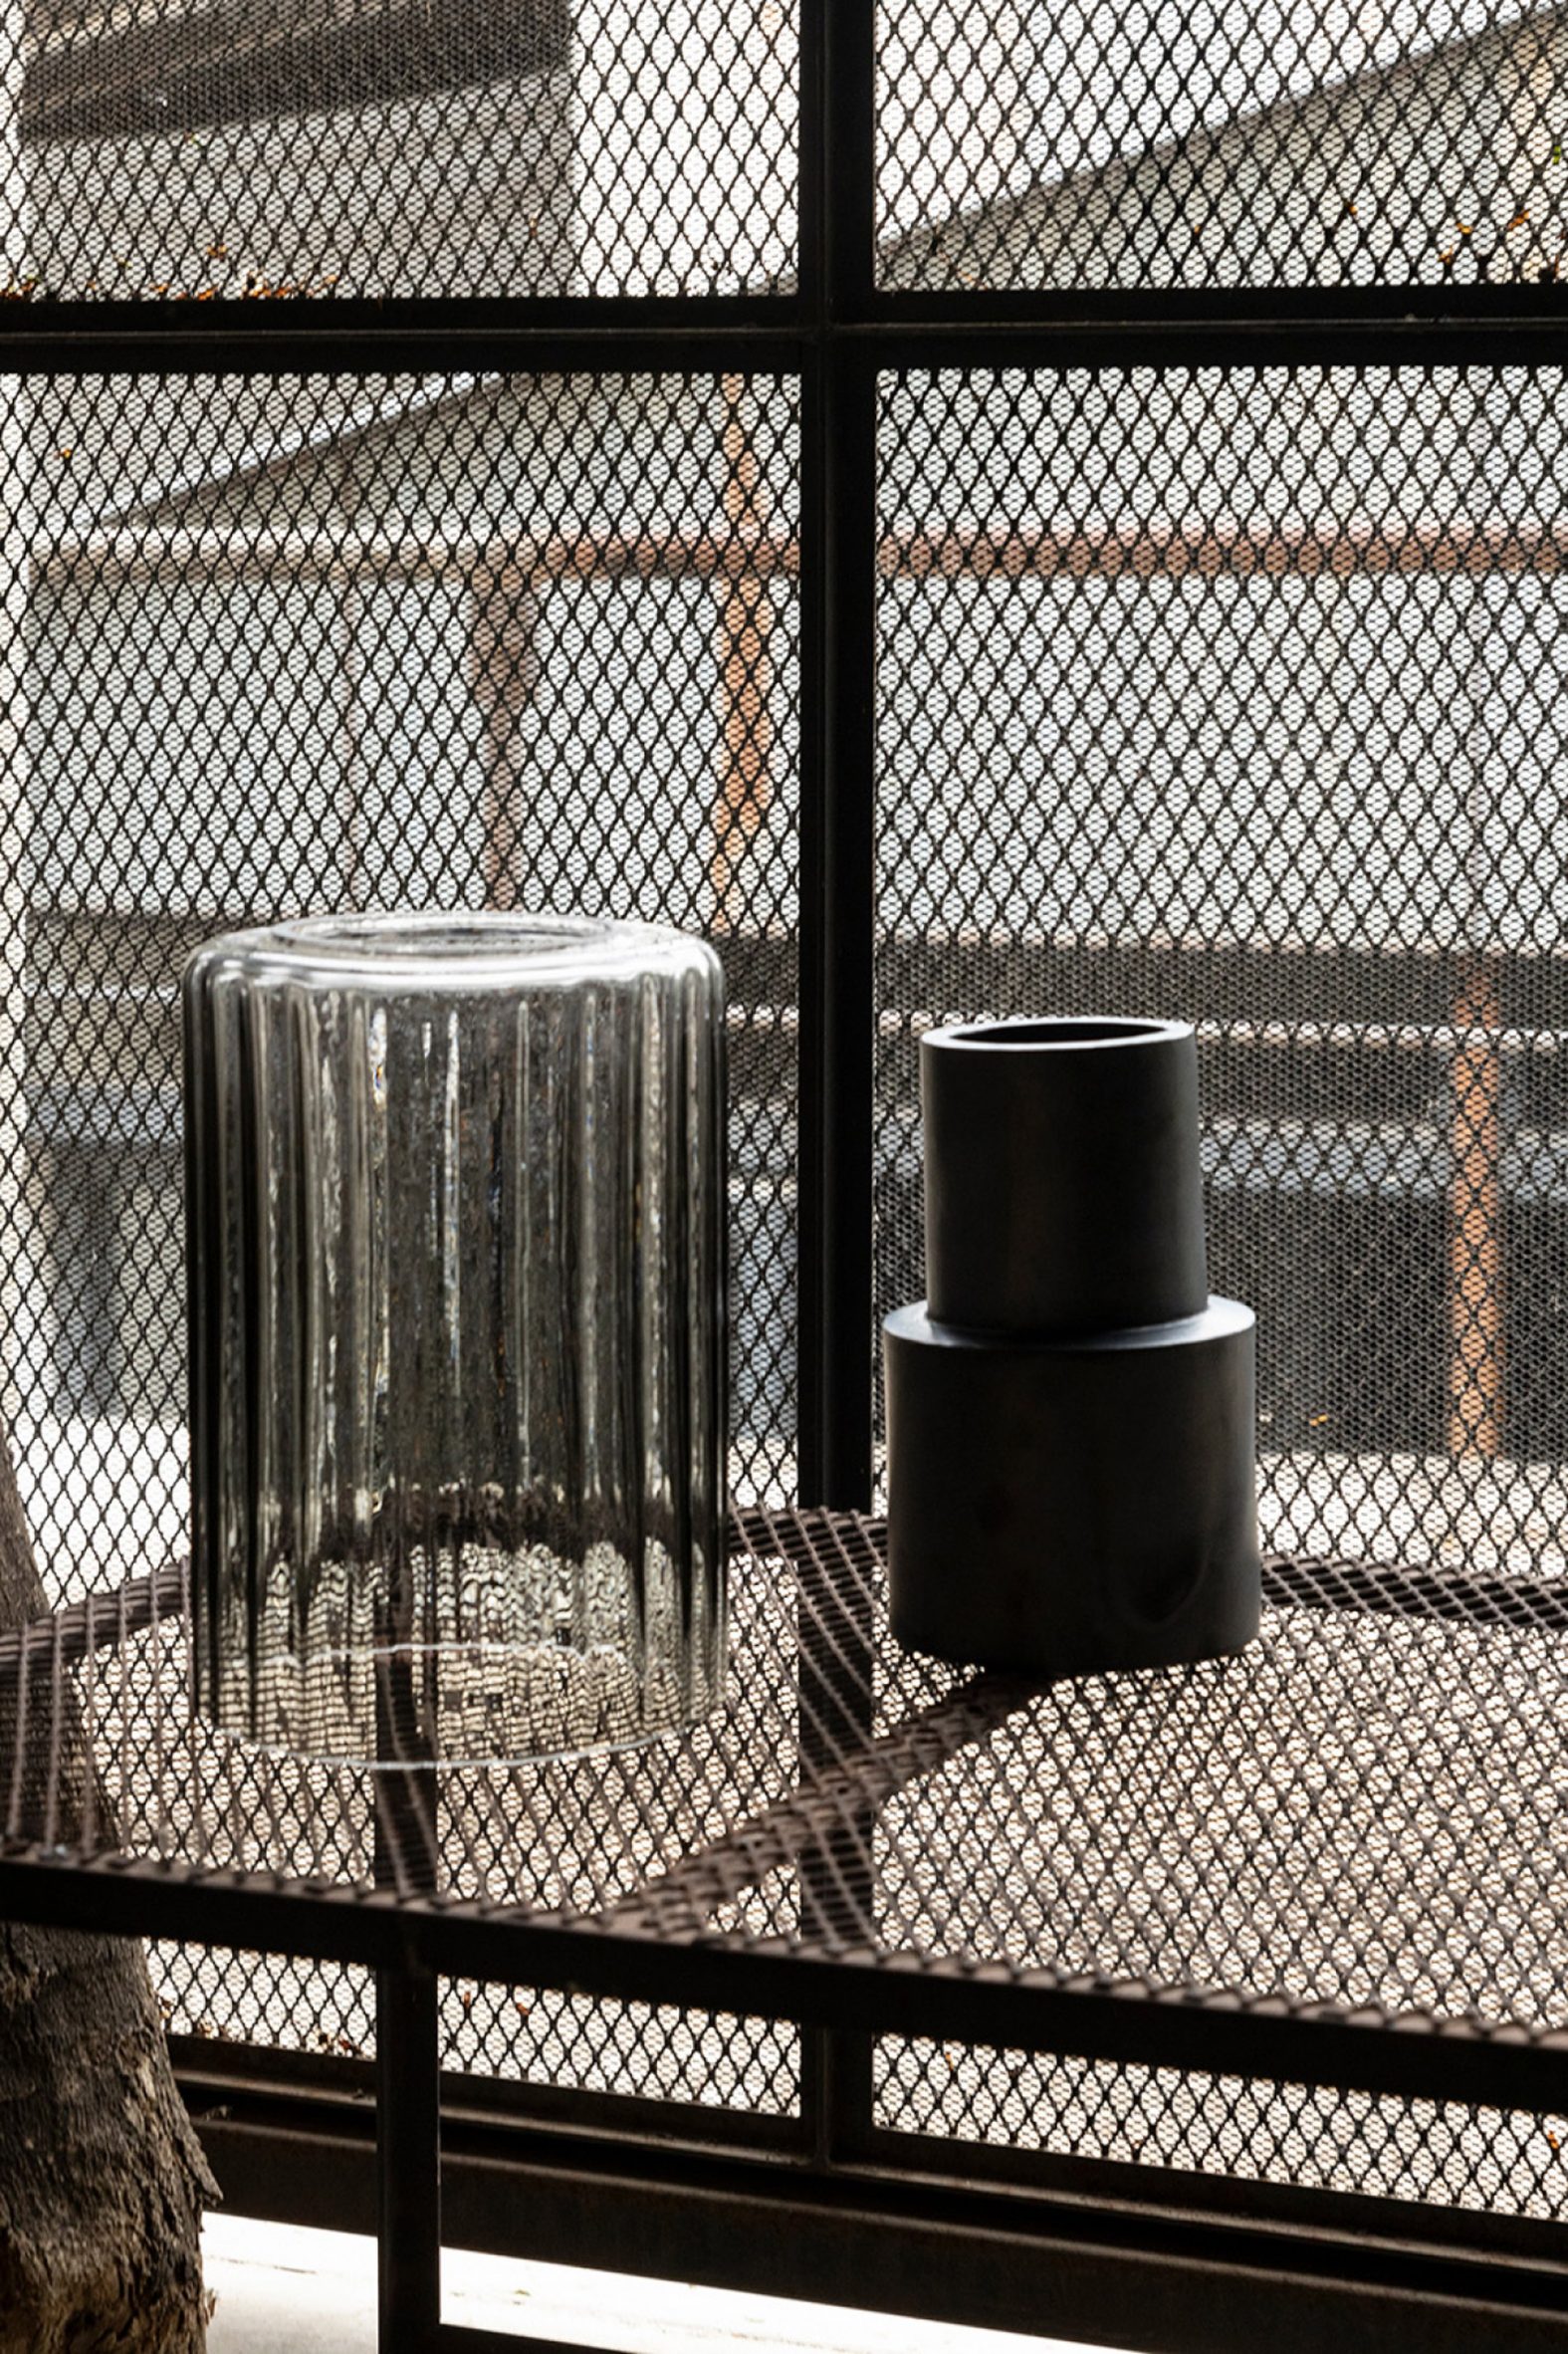 Rippled glass lampshade next to a black ceramic cylinder